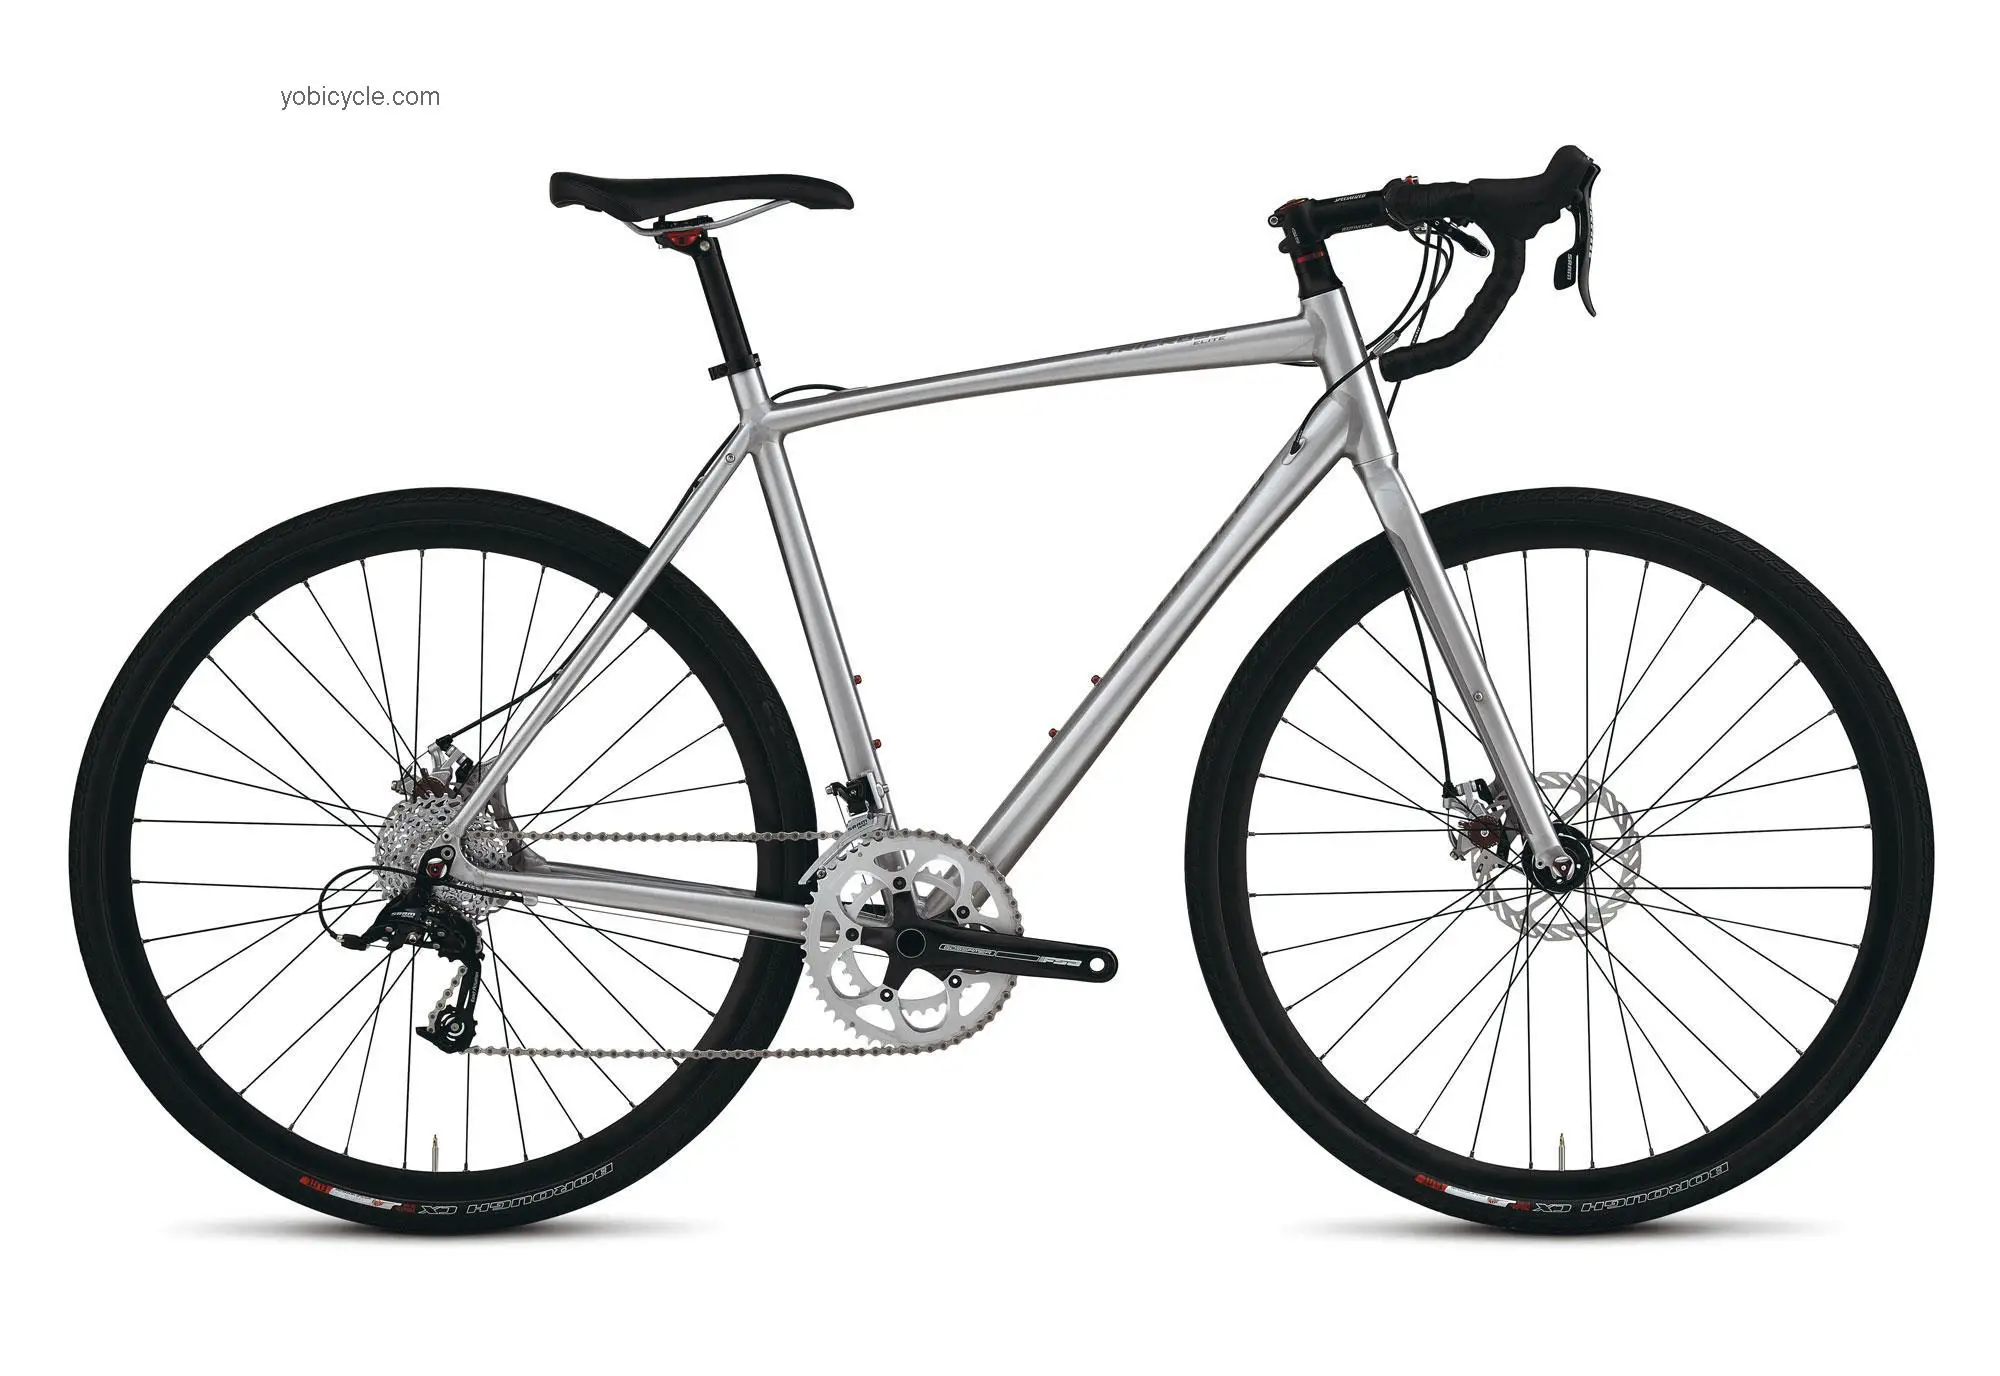 Specialized Tricross Elite Disc 2012 comparison online with competitors